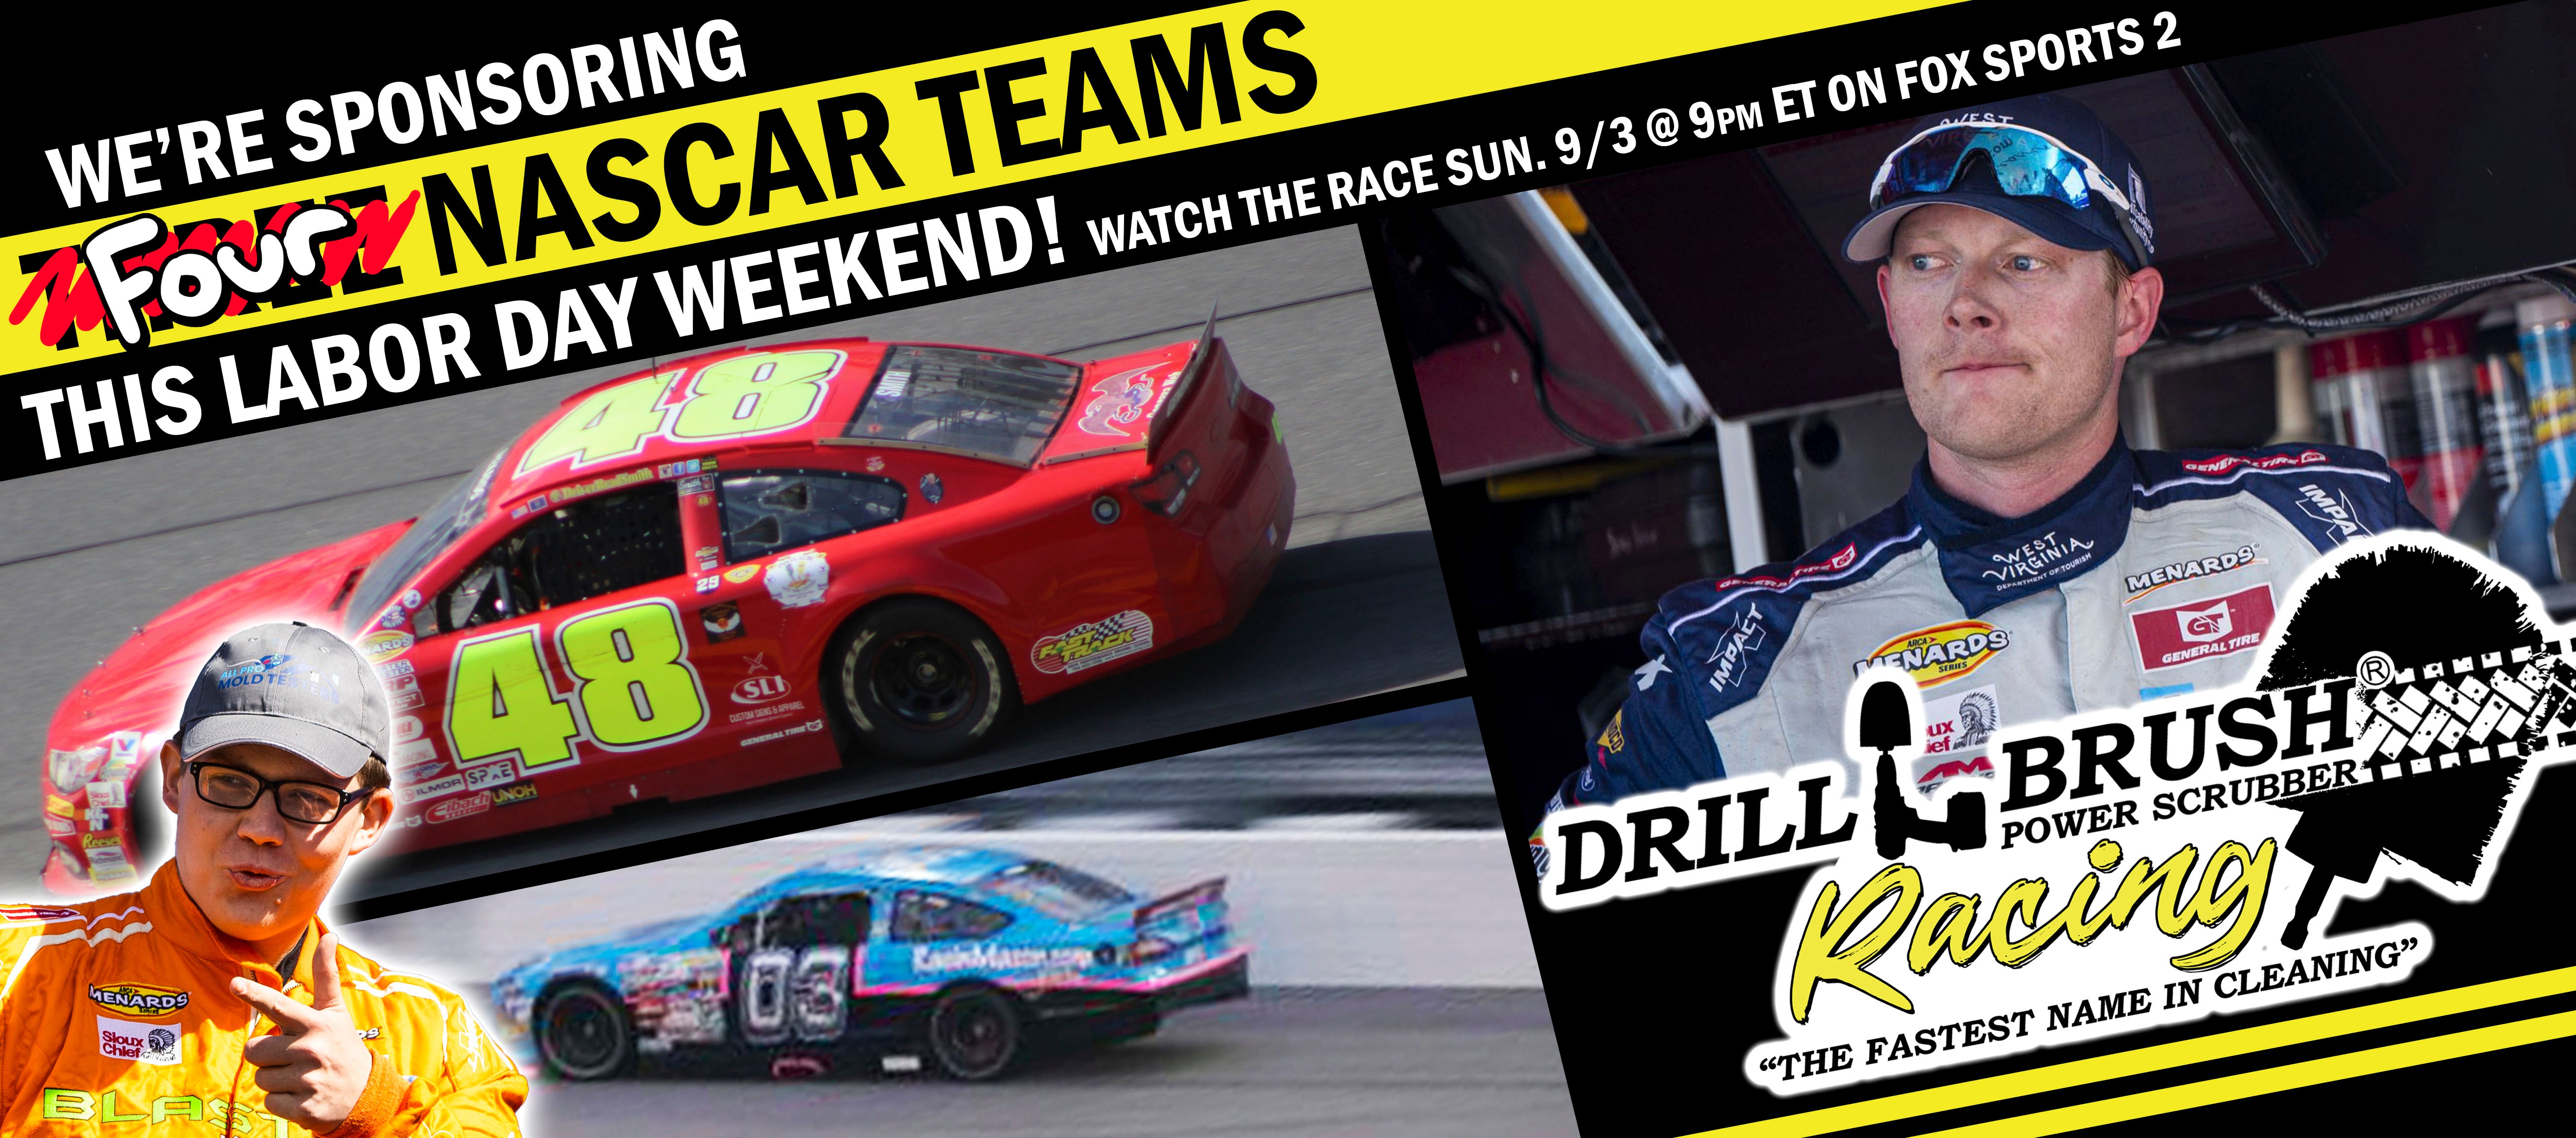 Drillbrush Goes NASCAR Racing with Several ARCA Menards Series Teams at DuQuoin!